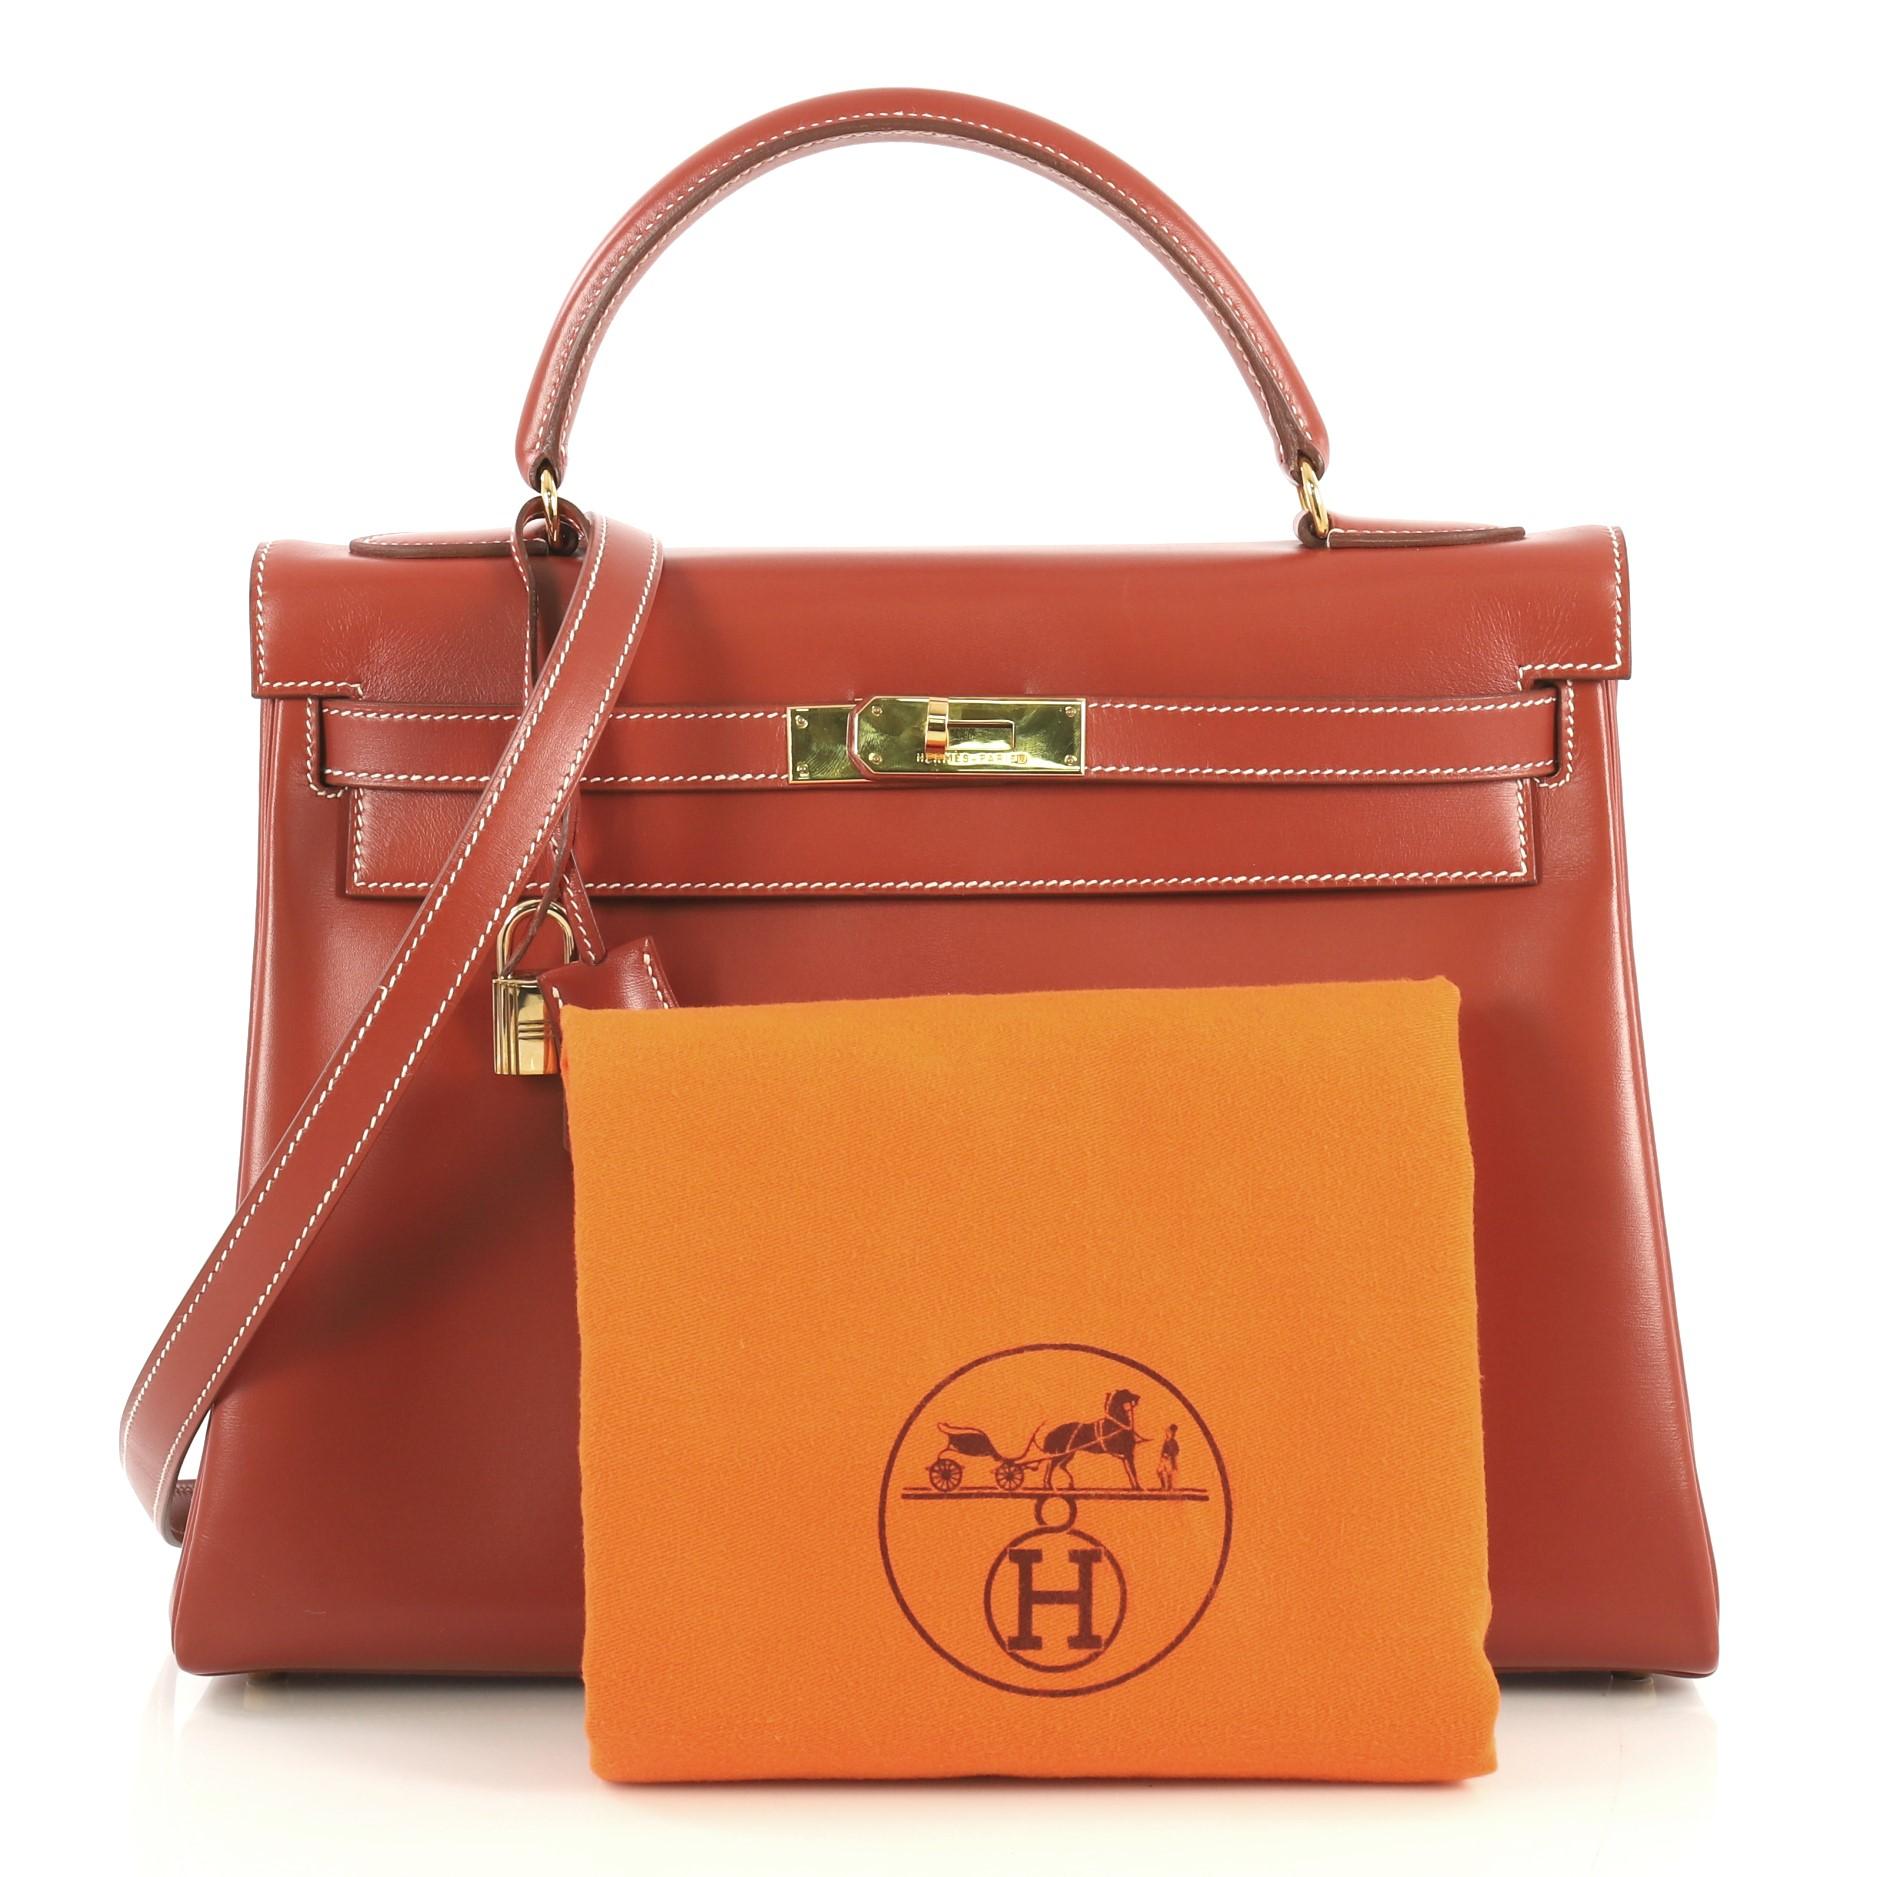 This Hermes Kelly Handbag Brique Box Calf with Gold Hardware 32, crafted in Brique red Box Calf leather, features a single rolled top handle, frontal flap, and gold hardware. Its turn-lock closure opens to a Brique red Chevre leather interior with